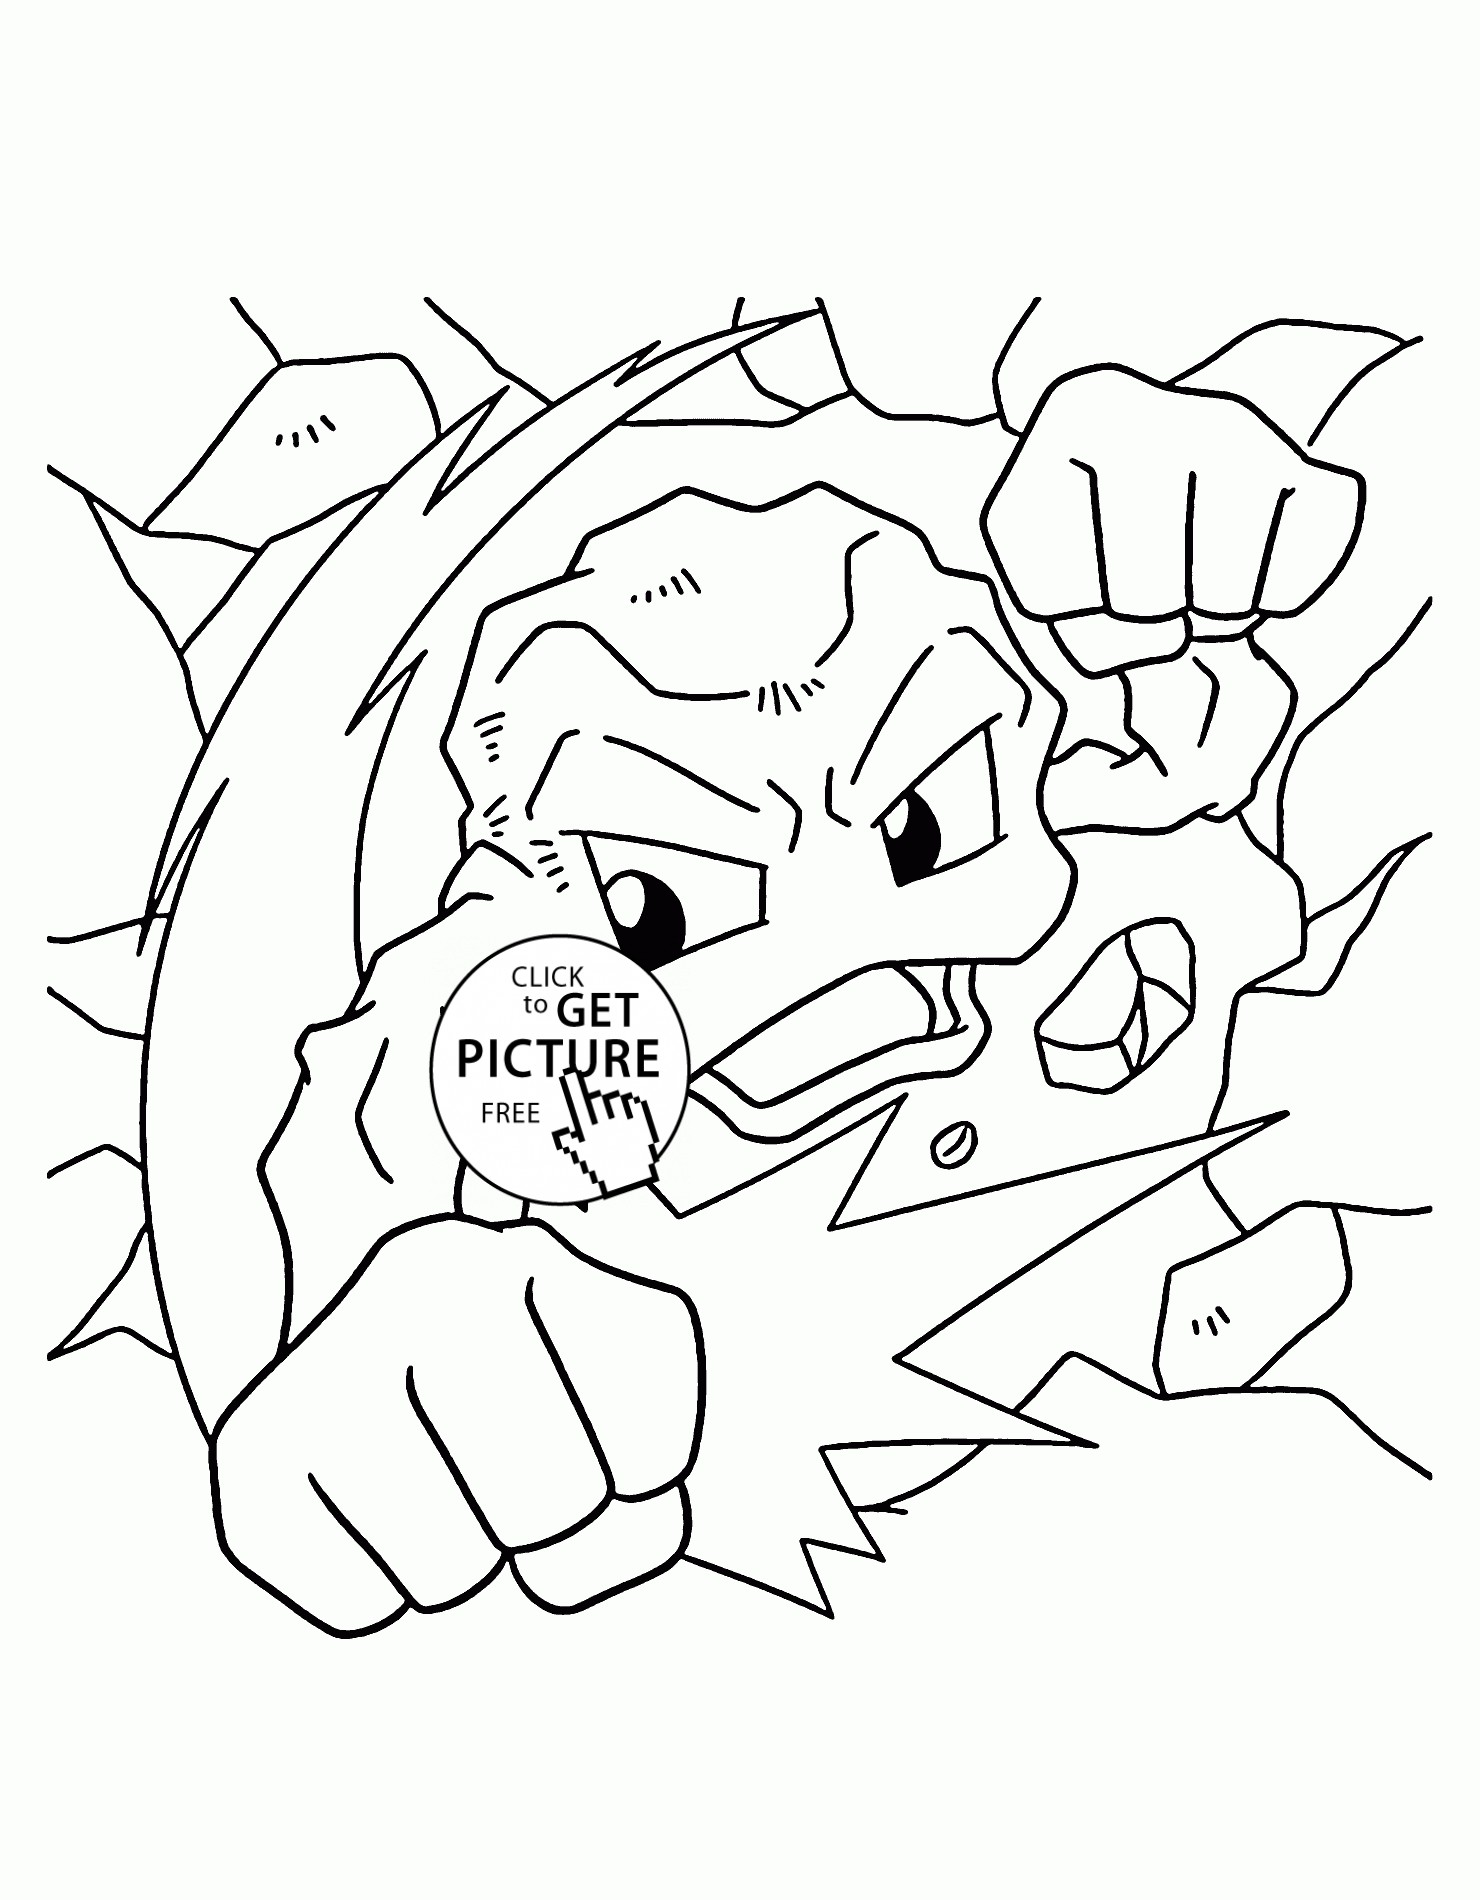 Pokemon Geodude coloring pages for kids pokemon characters printables free Wuppsy